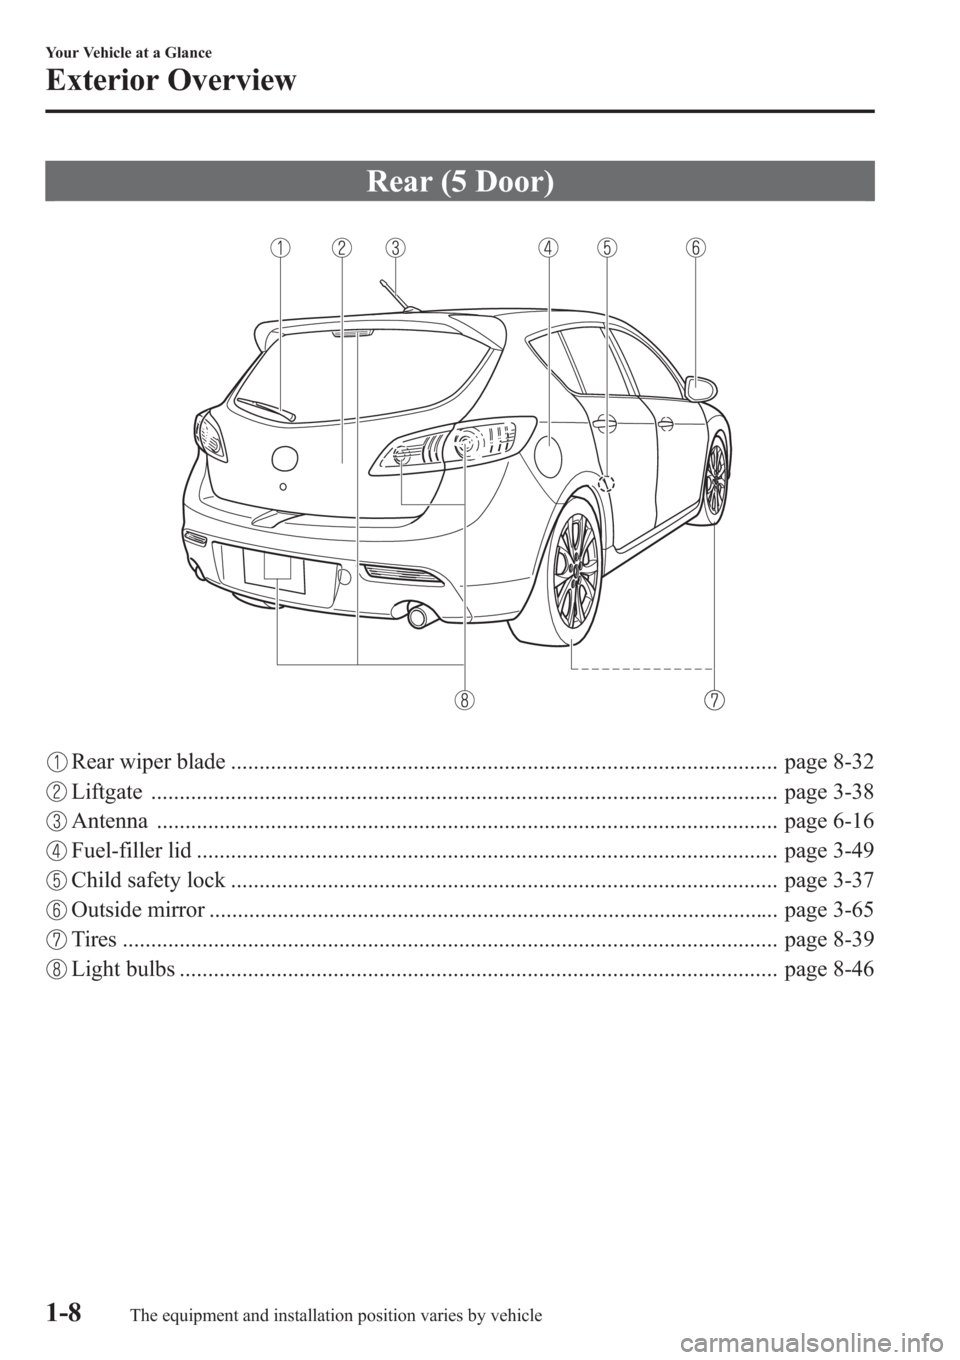 MAZDA MODEL 3 HATCHBACK 2013   (in English) User Guide Rear (5 Door)
Rear wiper blade ................................................................................................ page 8-32
Liftgate .....................................................